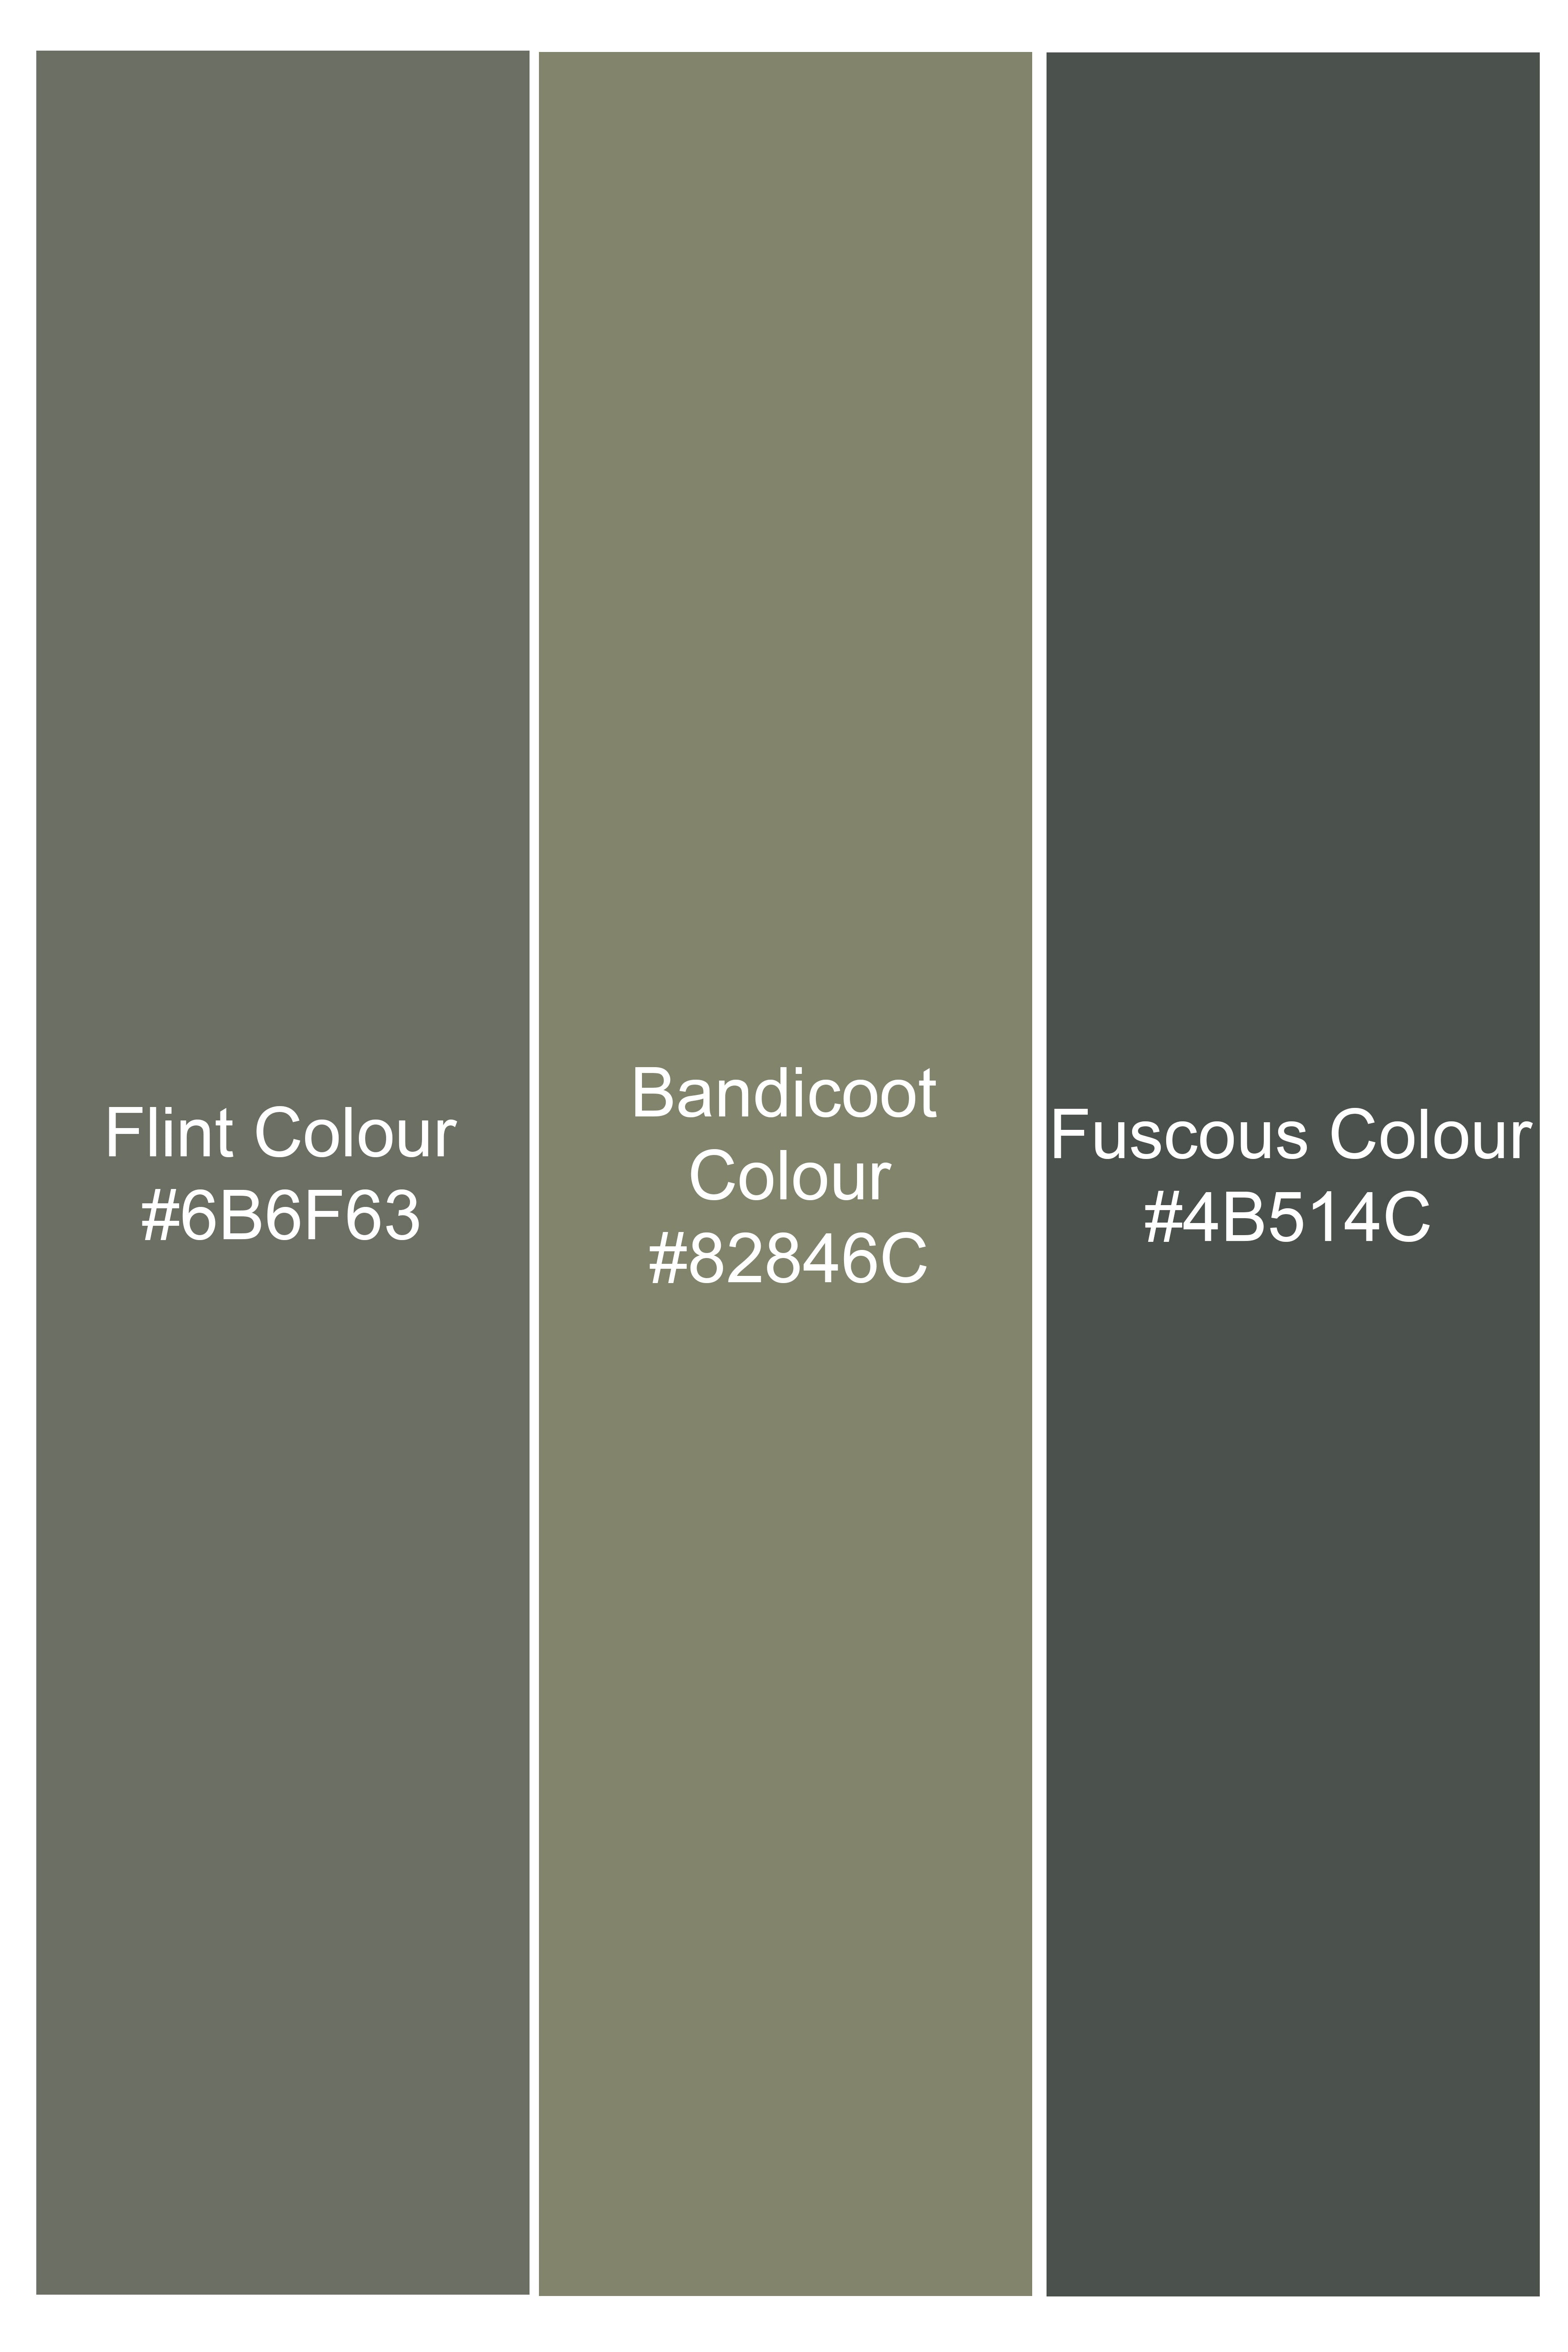 Flint Green with Fuscous Green Camouflage Premium Cotton Blazer BL3017-SB-D110-36, BL3017-SB-D110-38, BL3017-SB-D110-40, BL3017-SB-D110-42, BL3017-SB-D110-44, BL3017-SB-D110-46, BL3017-SB-D110-48, BL3017-SB-D110-50, BL3017-SB-D110-52, BL3017-SB-D110-54, BL3017-SB-D110-56, BL3017-SB-D110-58, BL3017-SB-D110-60